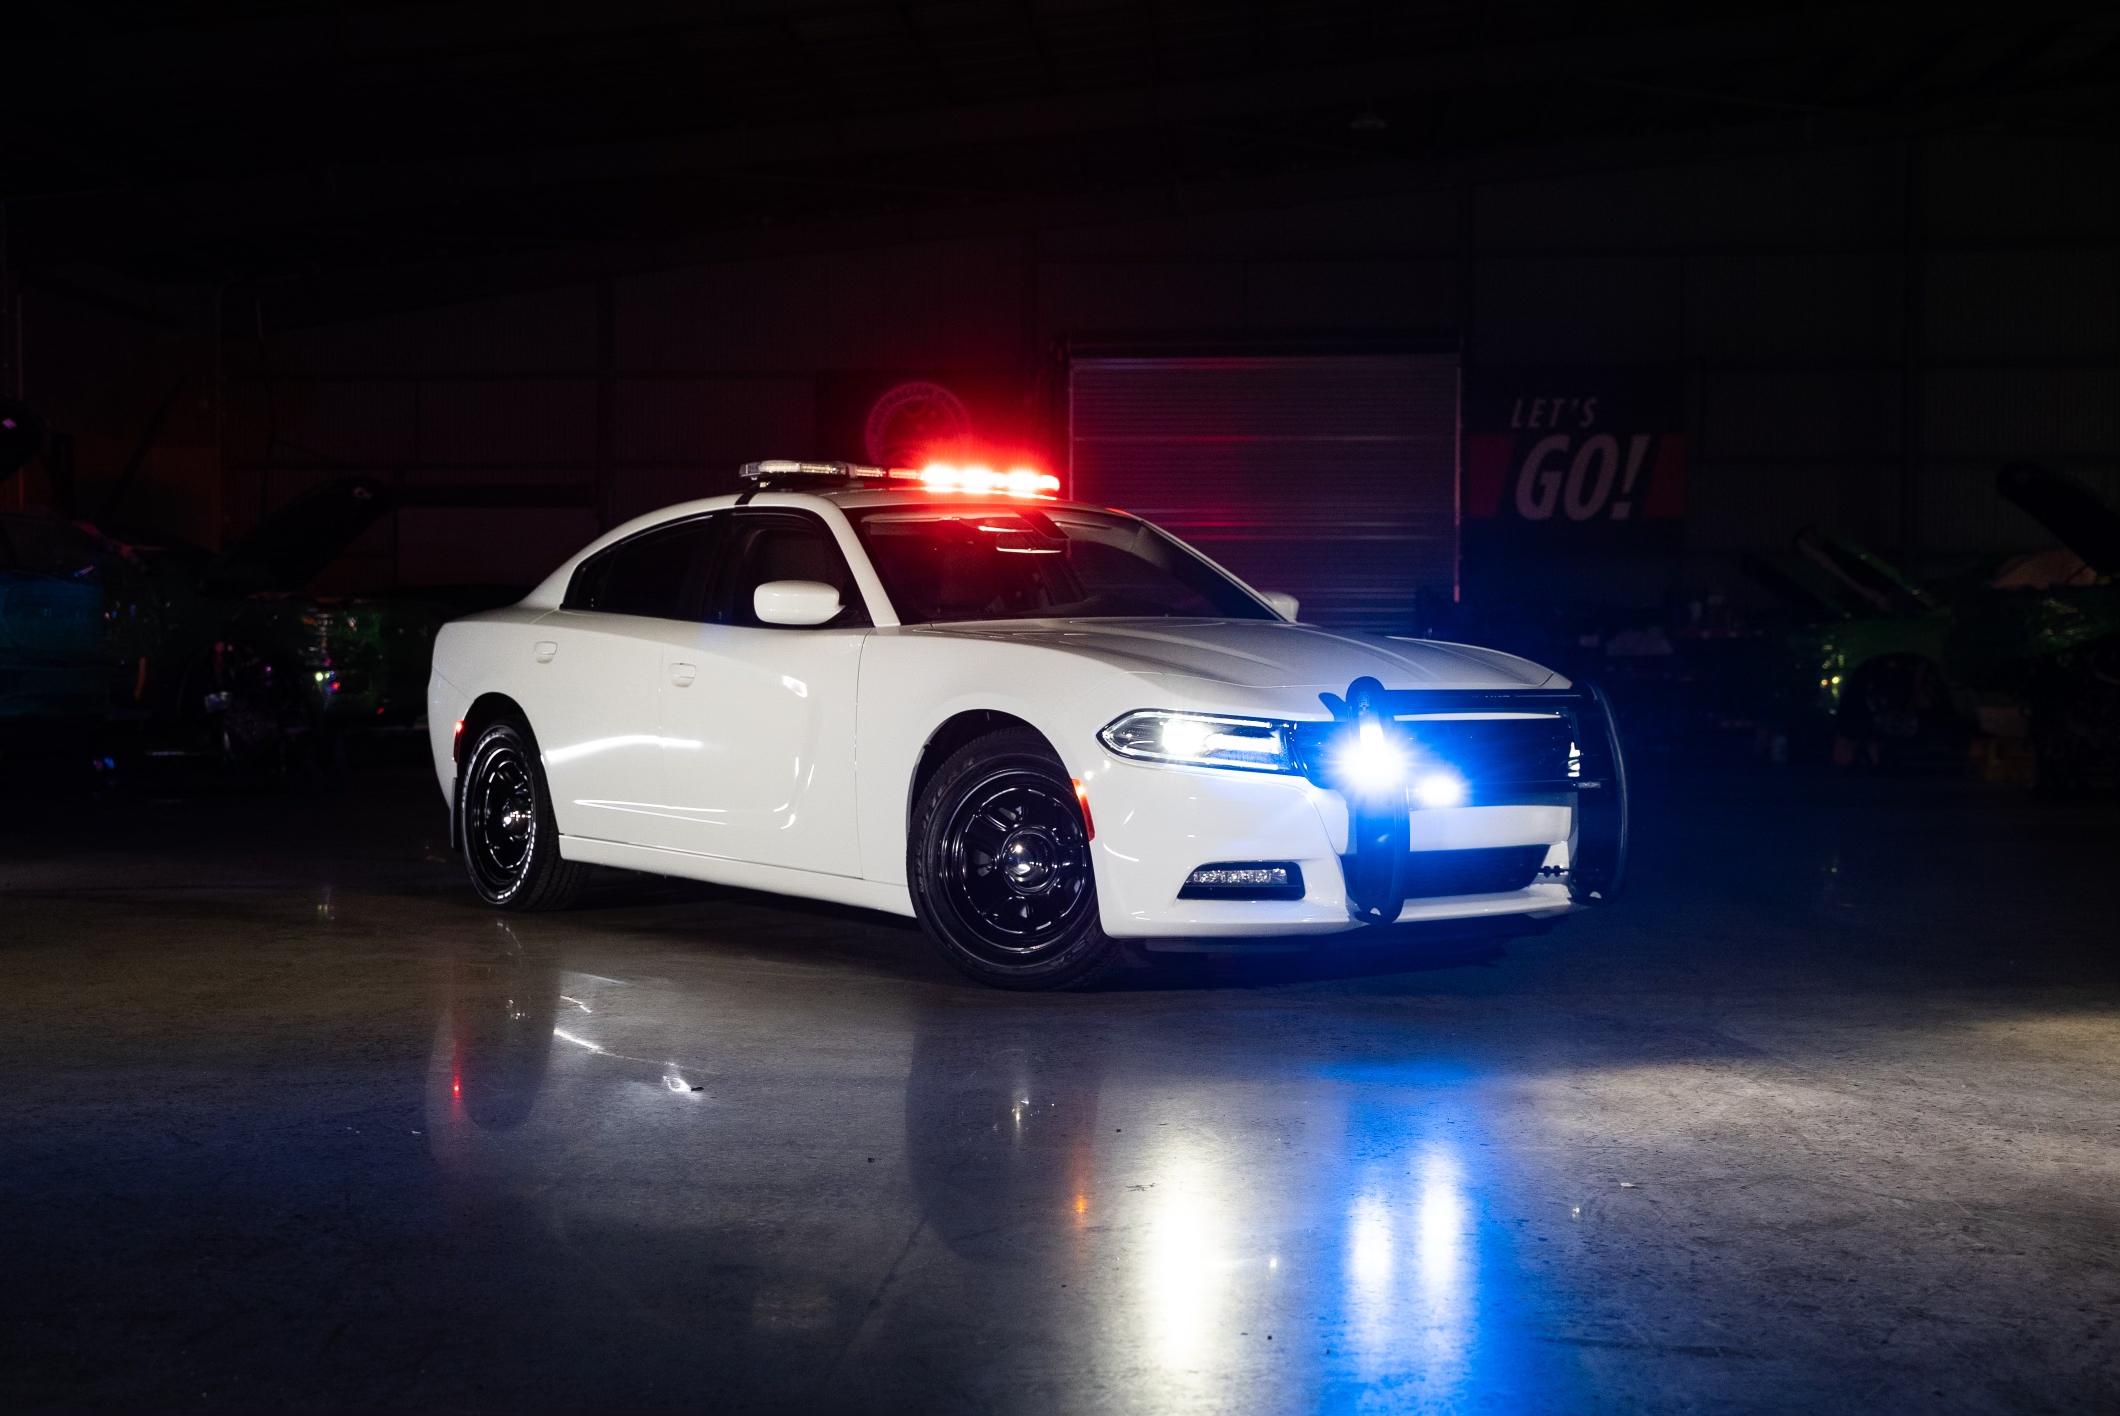 Dodge Charger police car with Australian twist lands Down Under | CarExpert